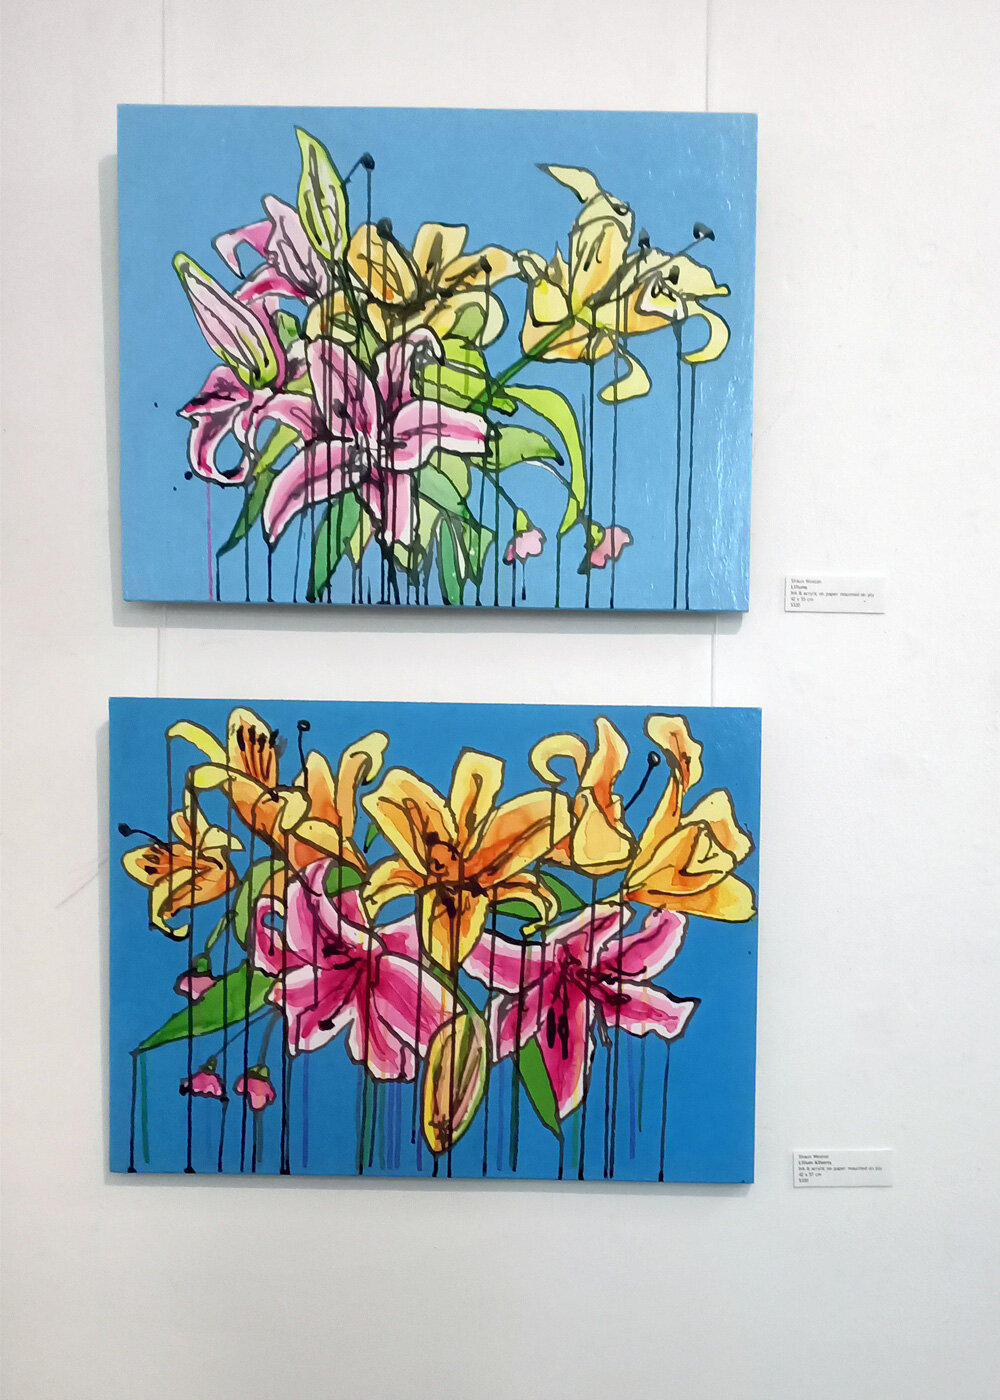  Liliums, Ink &amp; acrylic on paper mounted on ply, 42 x 55 cm   Lilium Allsorts, Ink &amp; acrylic on paper mounted on ply, 42 x 57 cm  